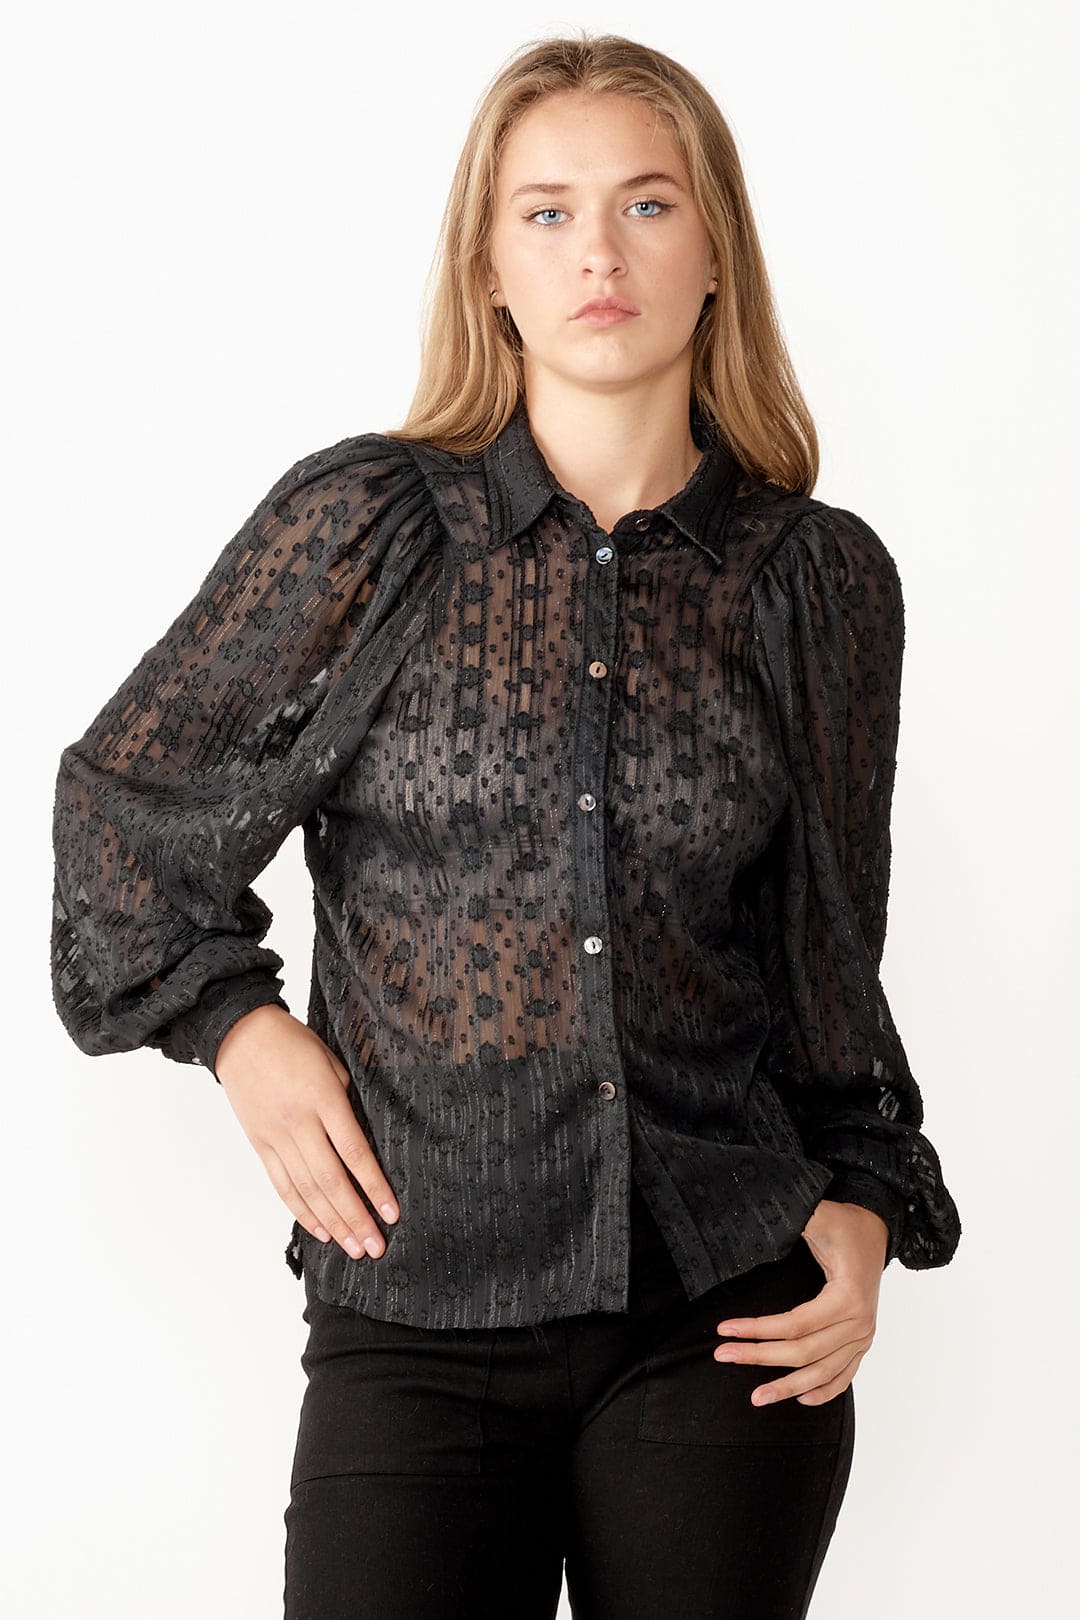 Kate Blouse - Cameo Clothing Line